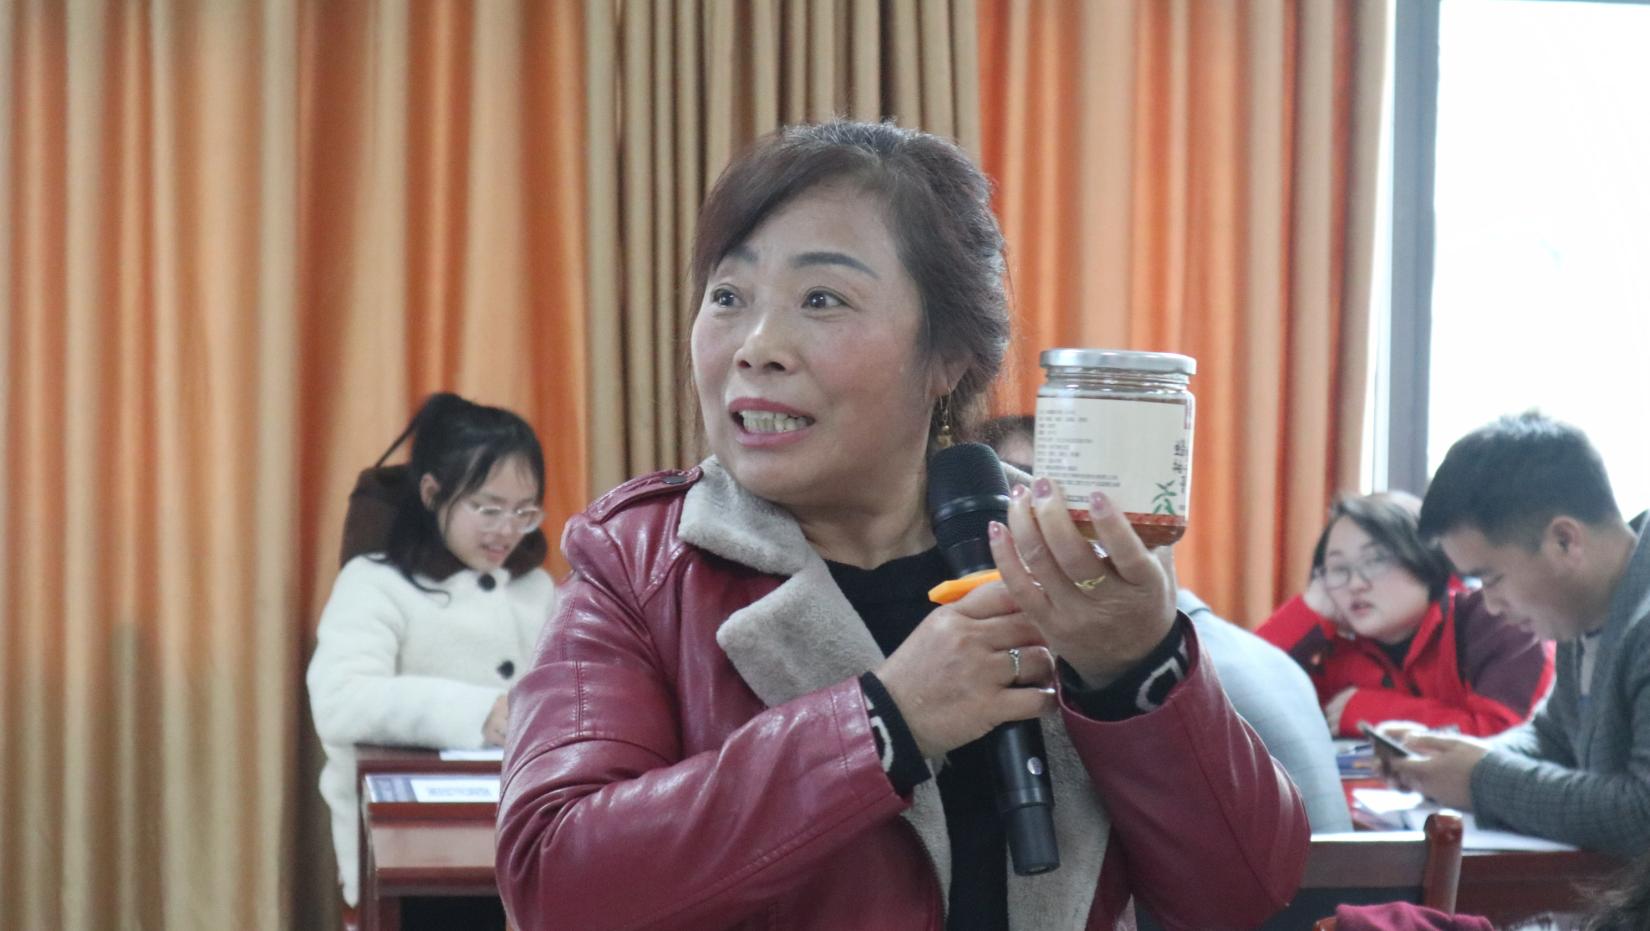 Yuan'ai presents a product she helped to market at a Women Up training in Fenghuang.